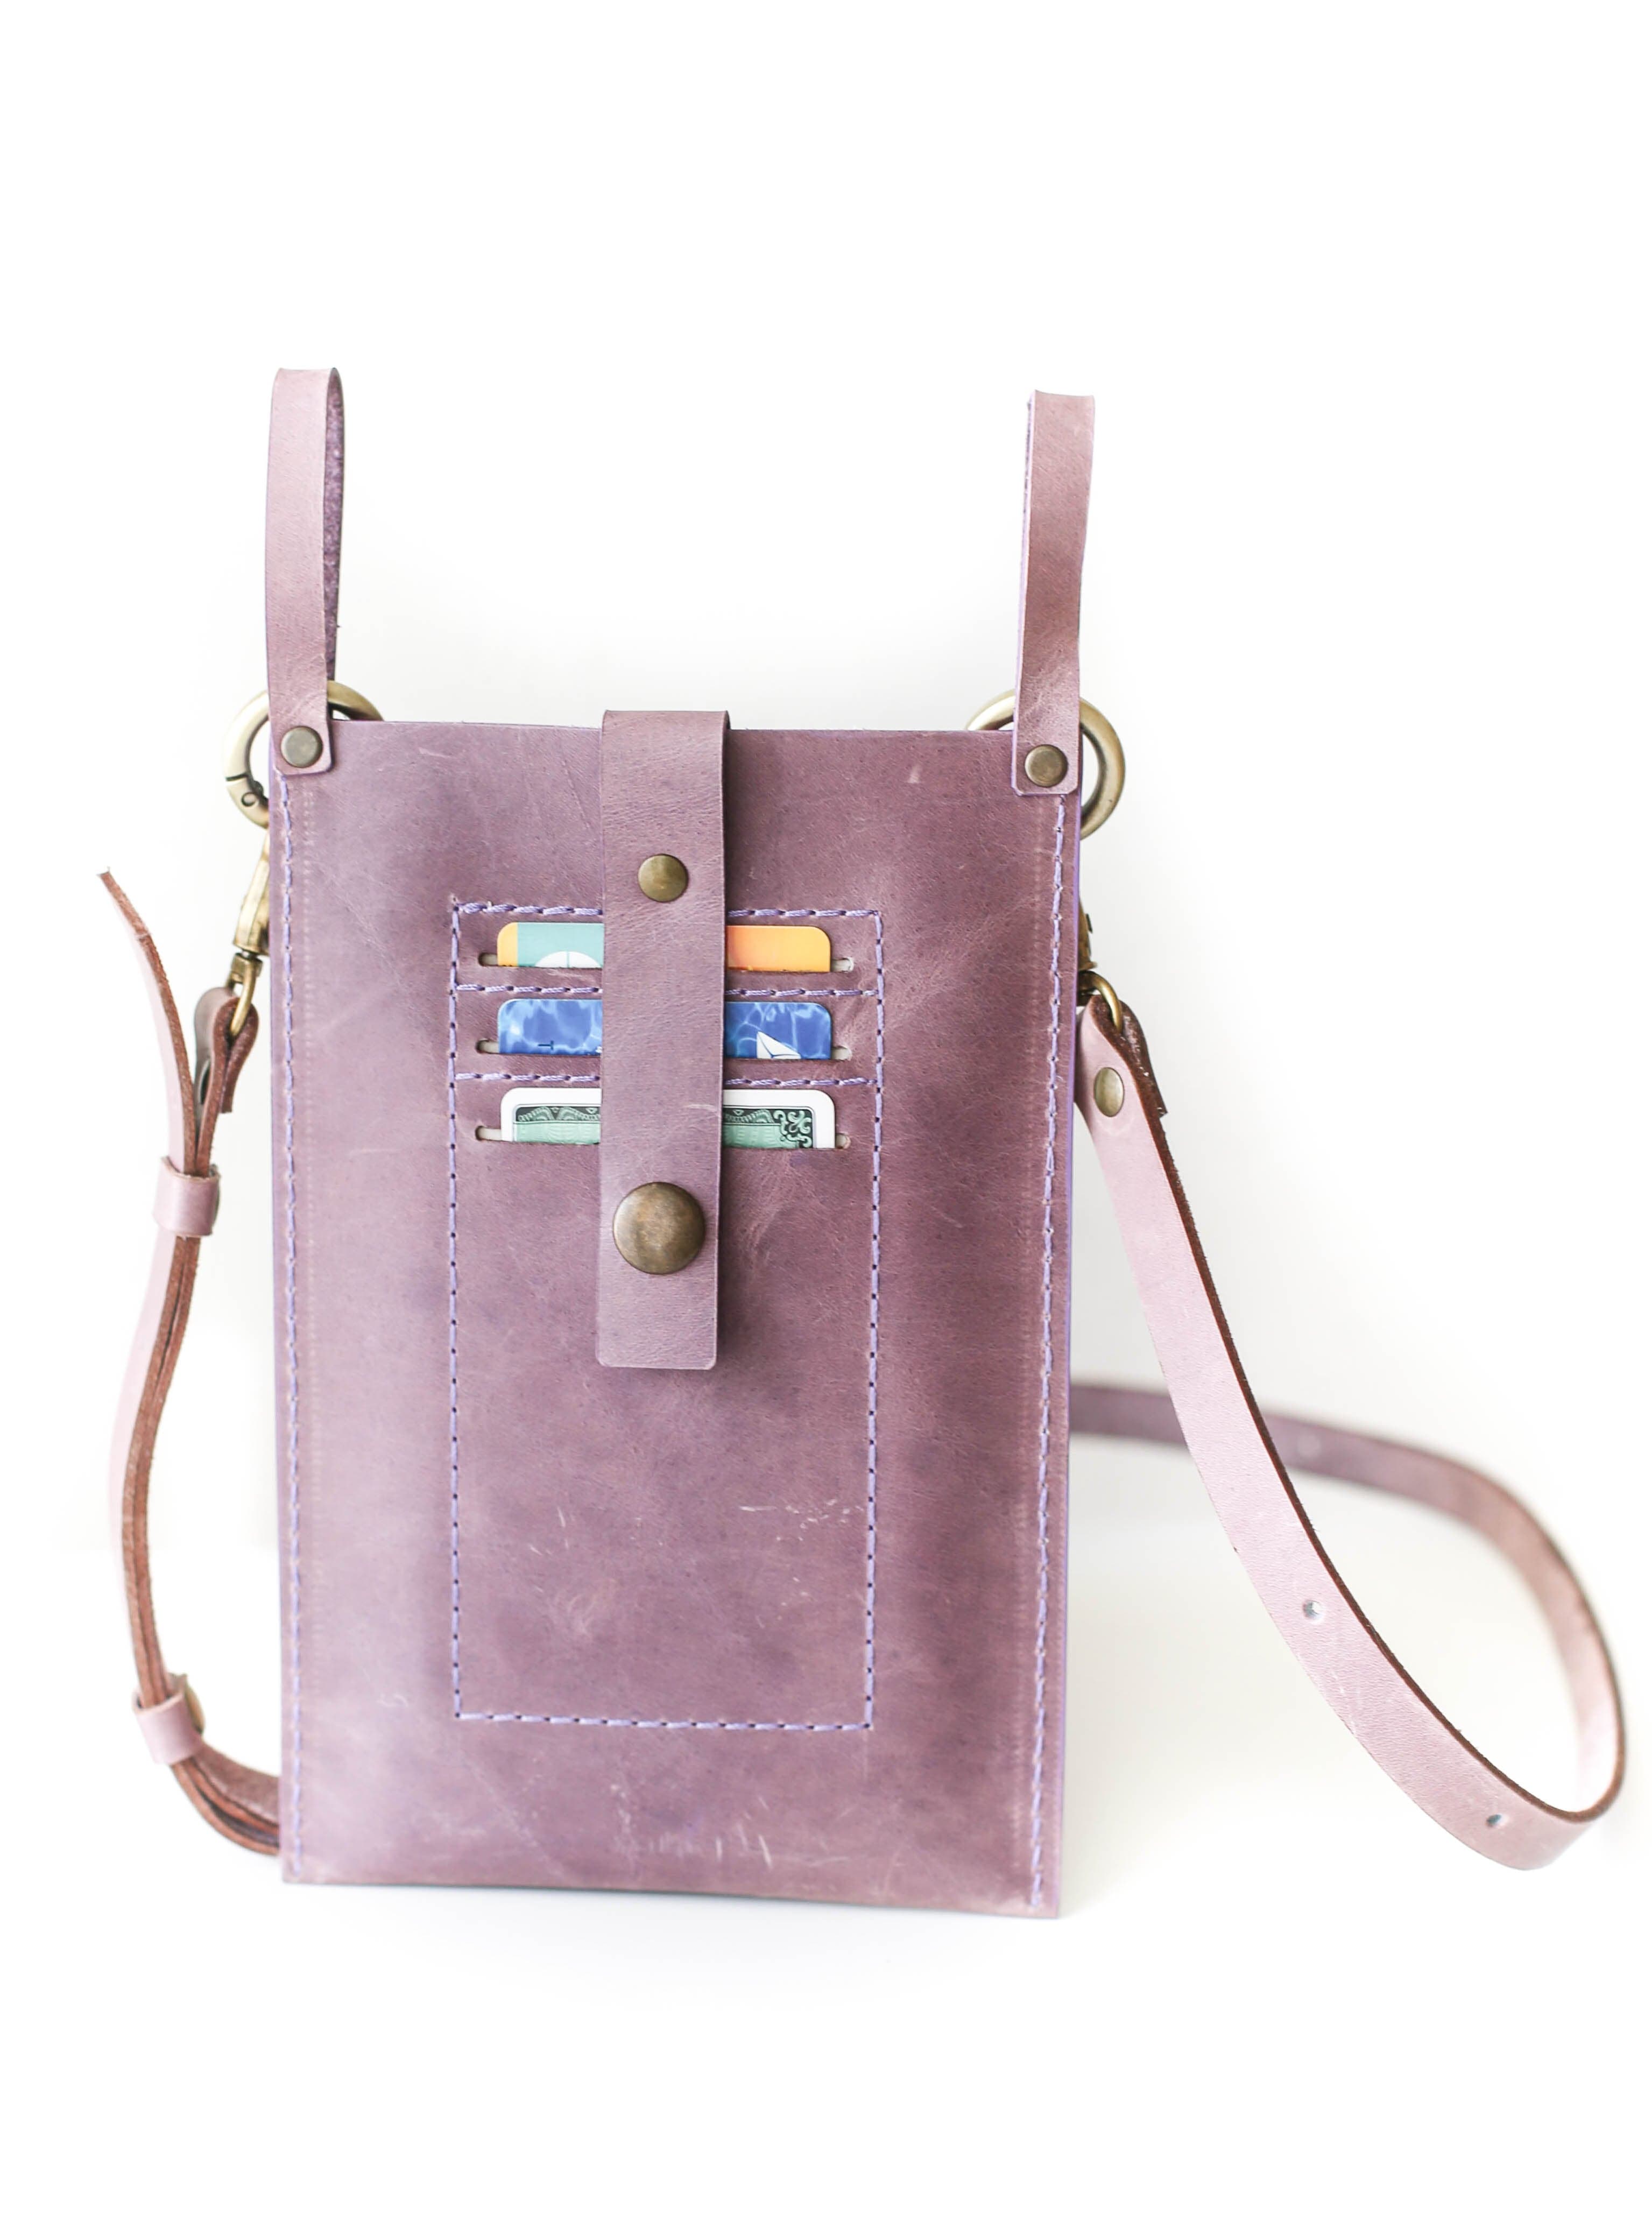 CQCYD crossbody cell phone purse wallet Small Leather India | Ubuy